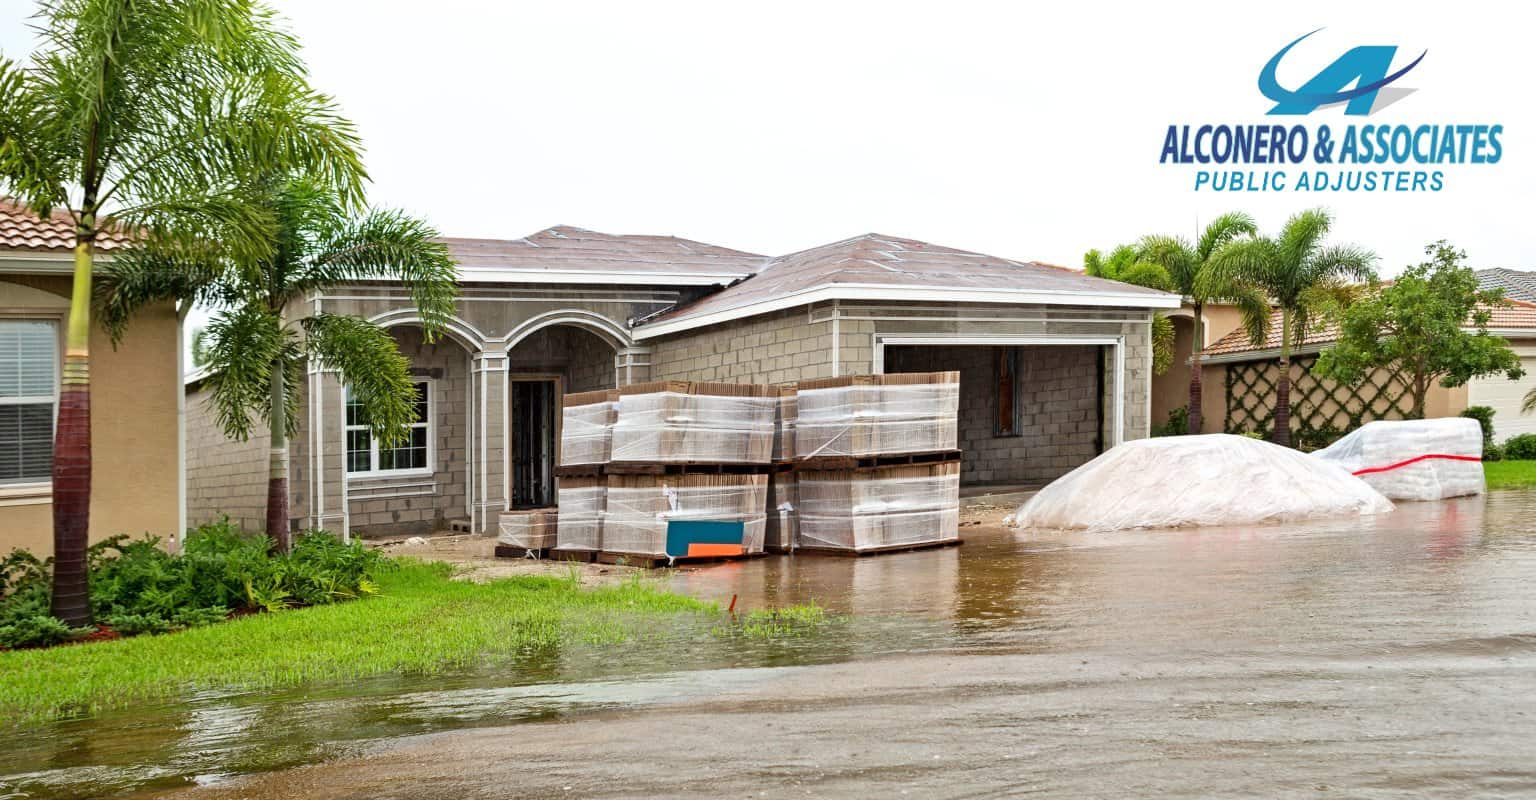 Alconero and Associates Public Adjusters assisting with Tampa water damage claims